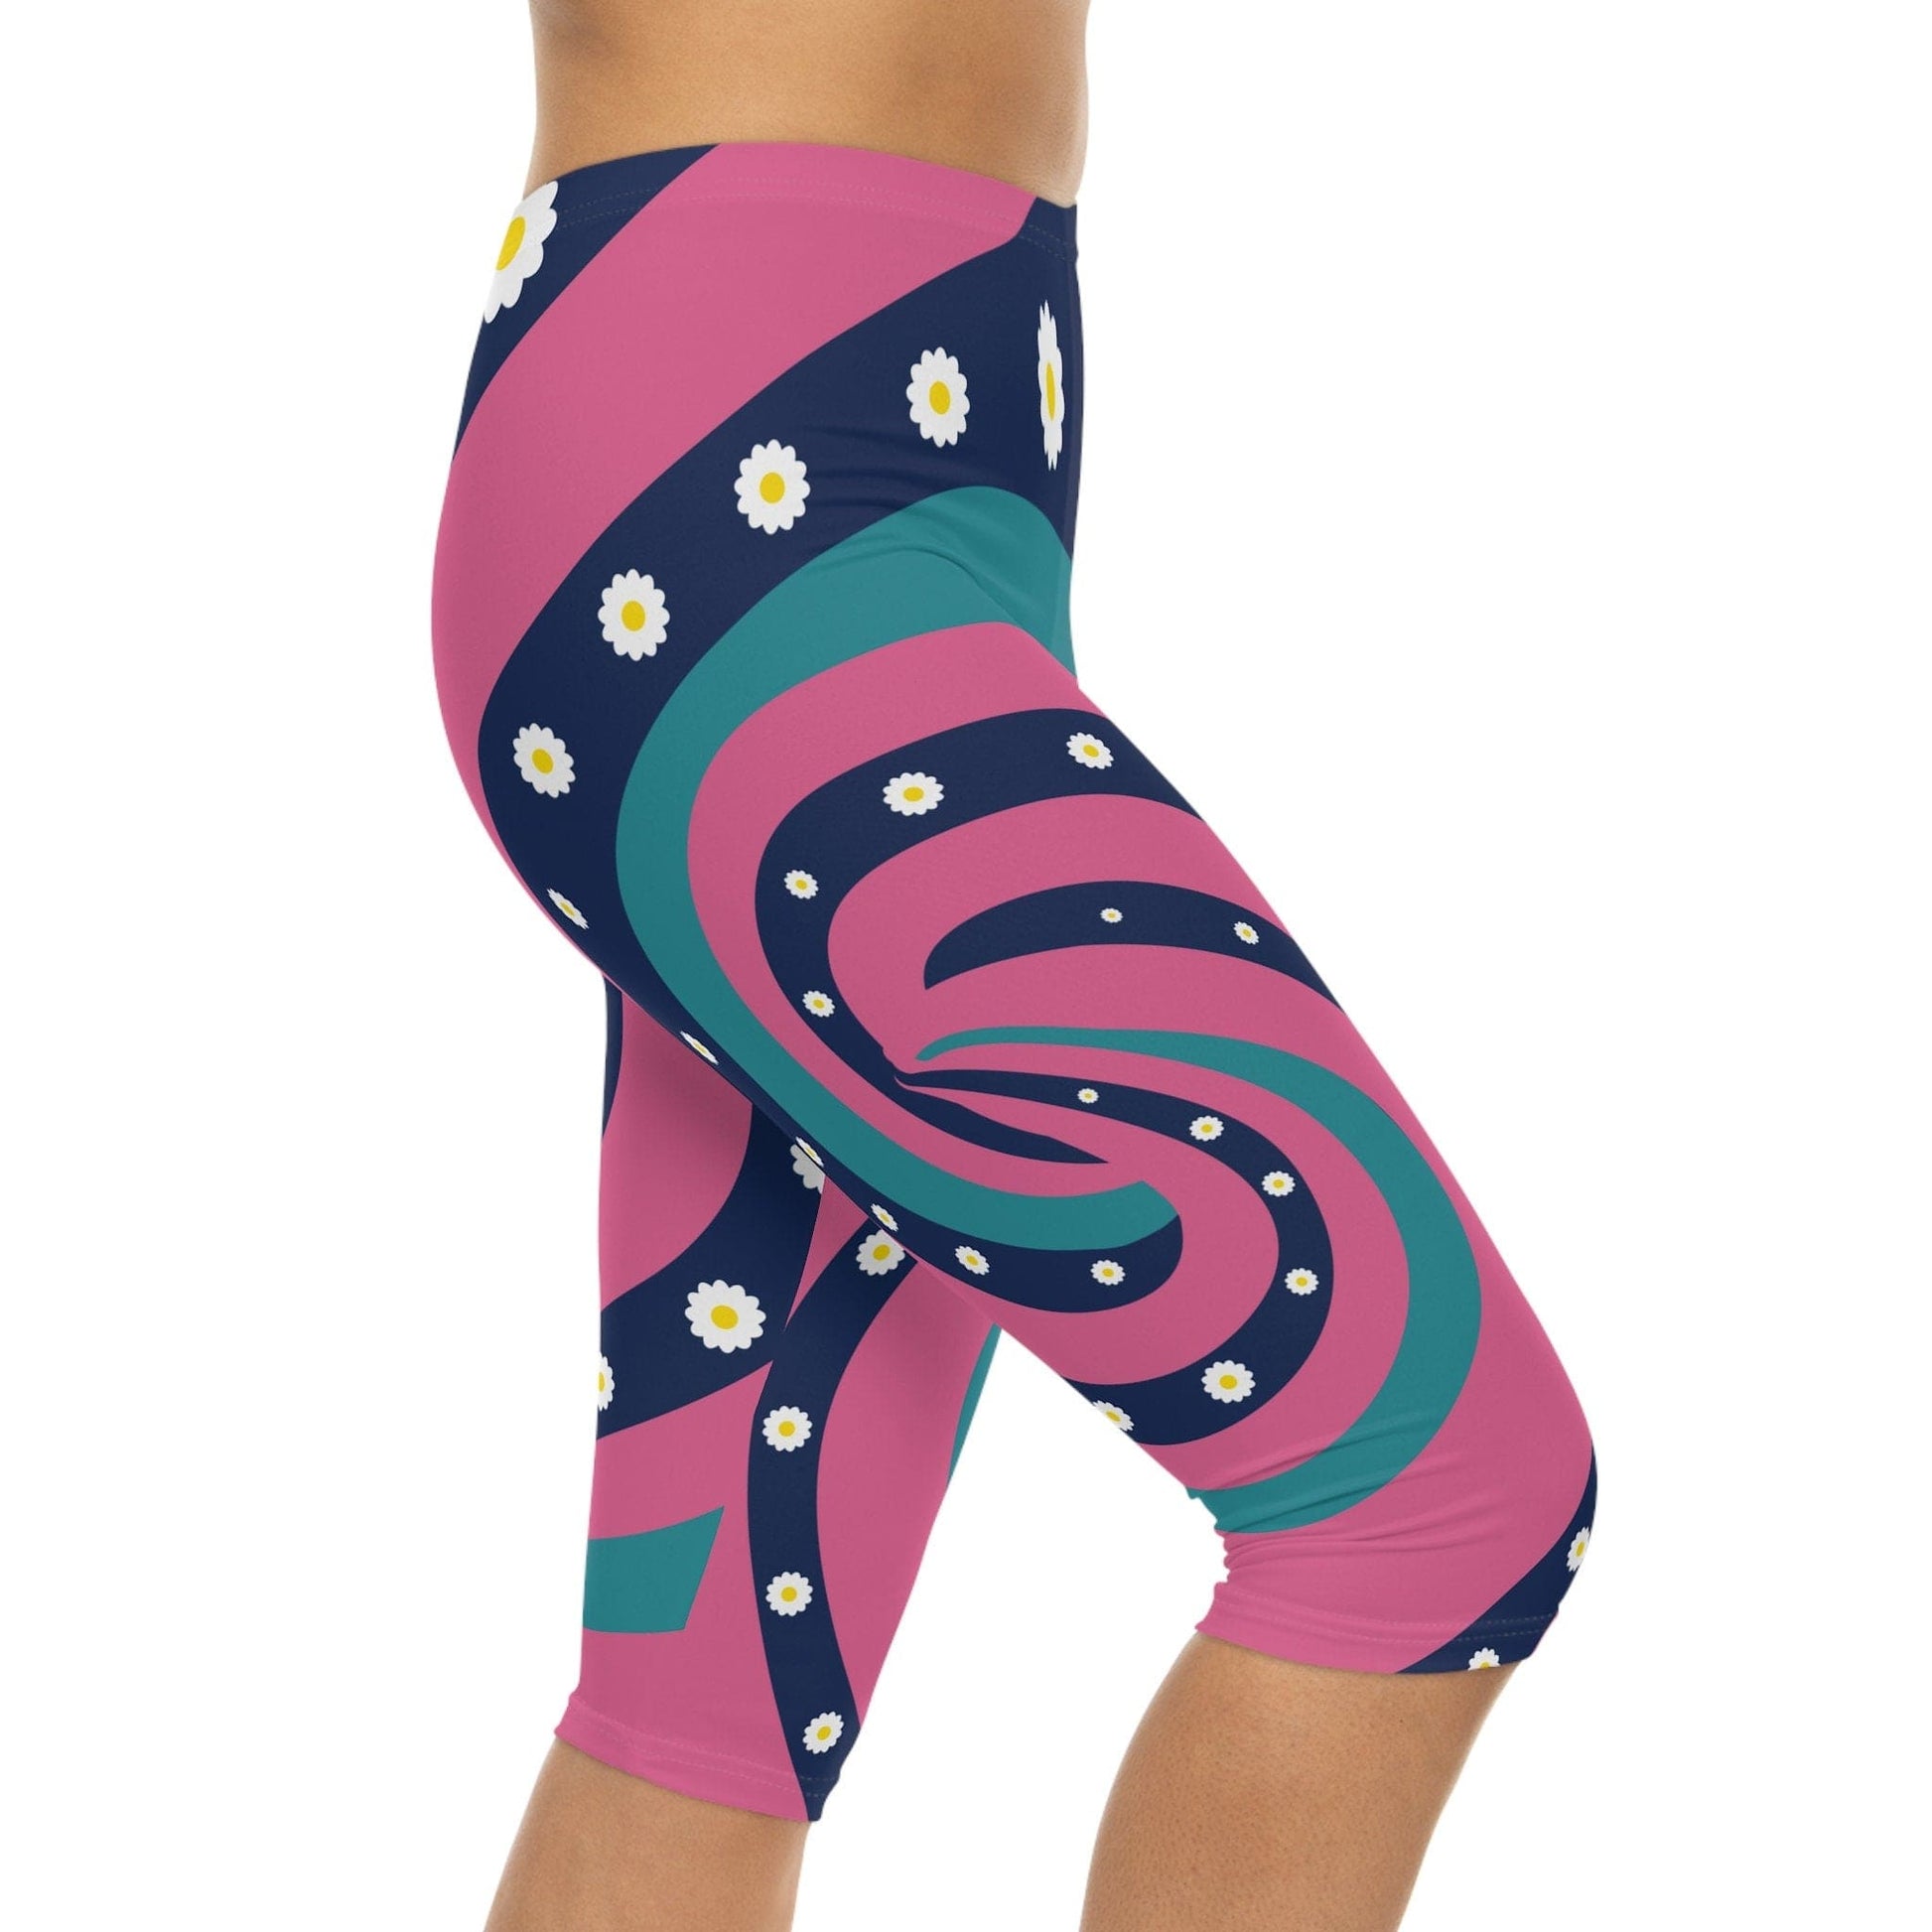 Retro Geometric Pattern Leggings - Stretchy Skinny Fit with Bold